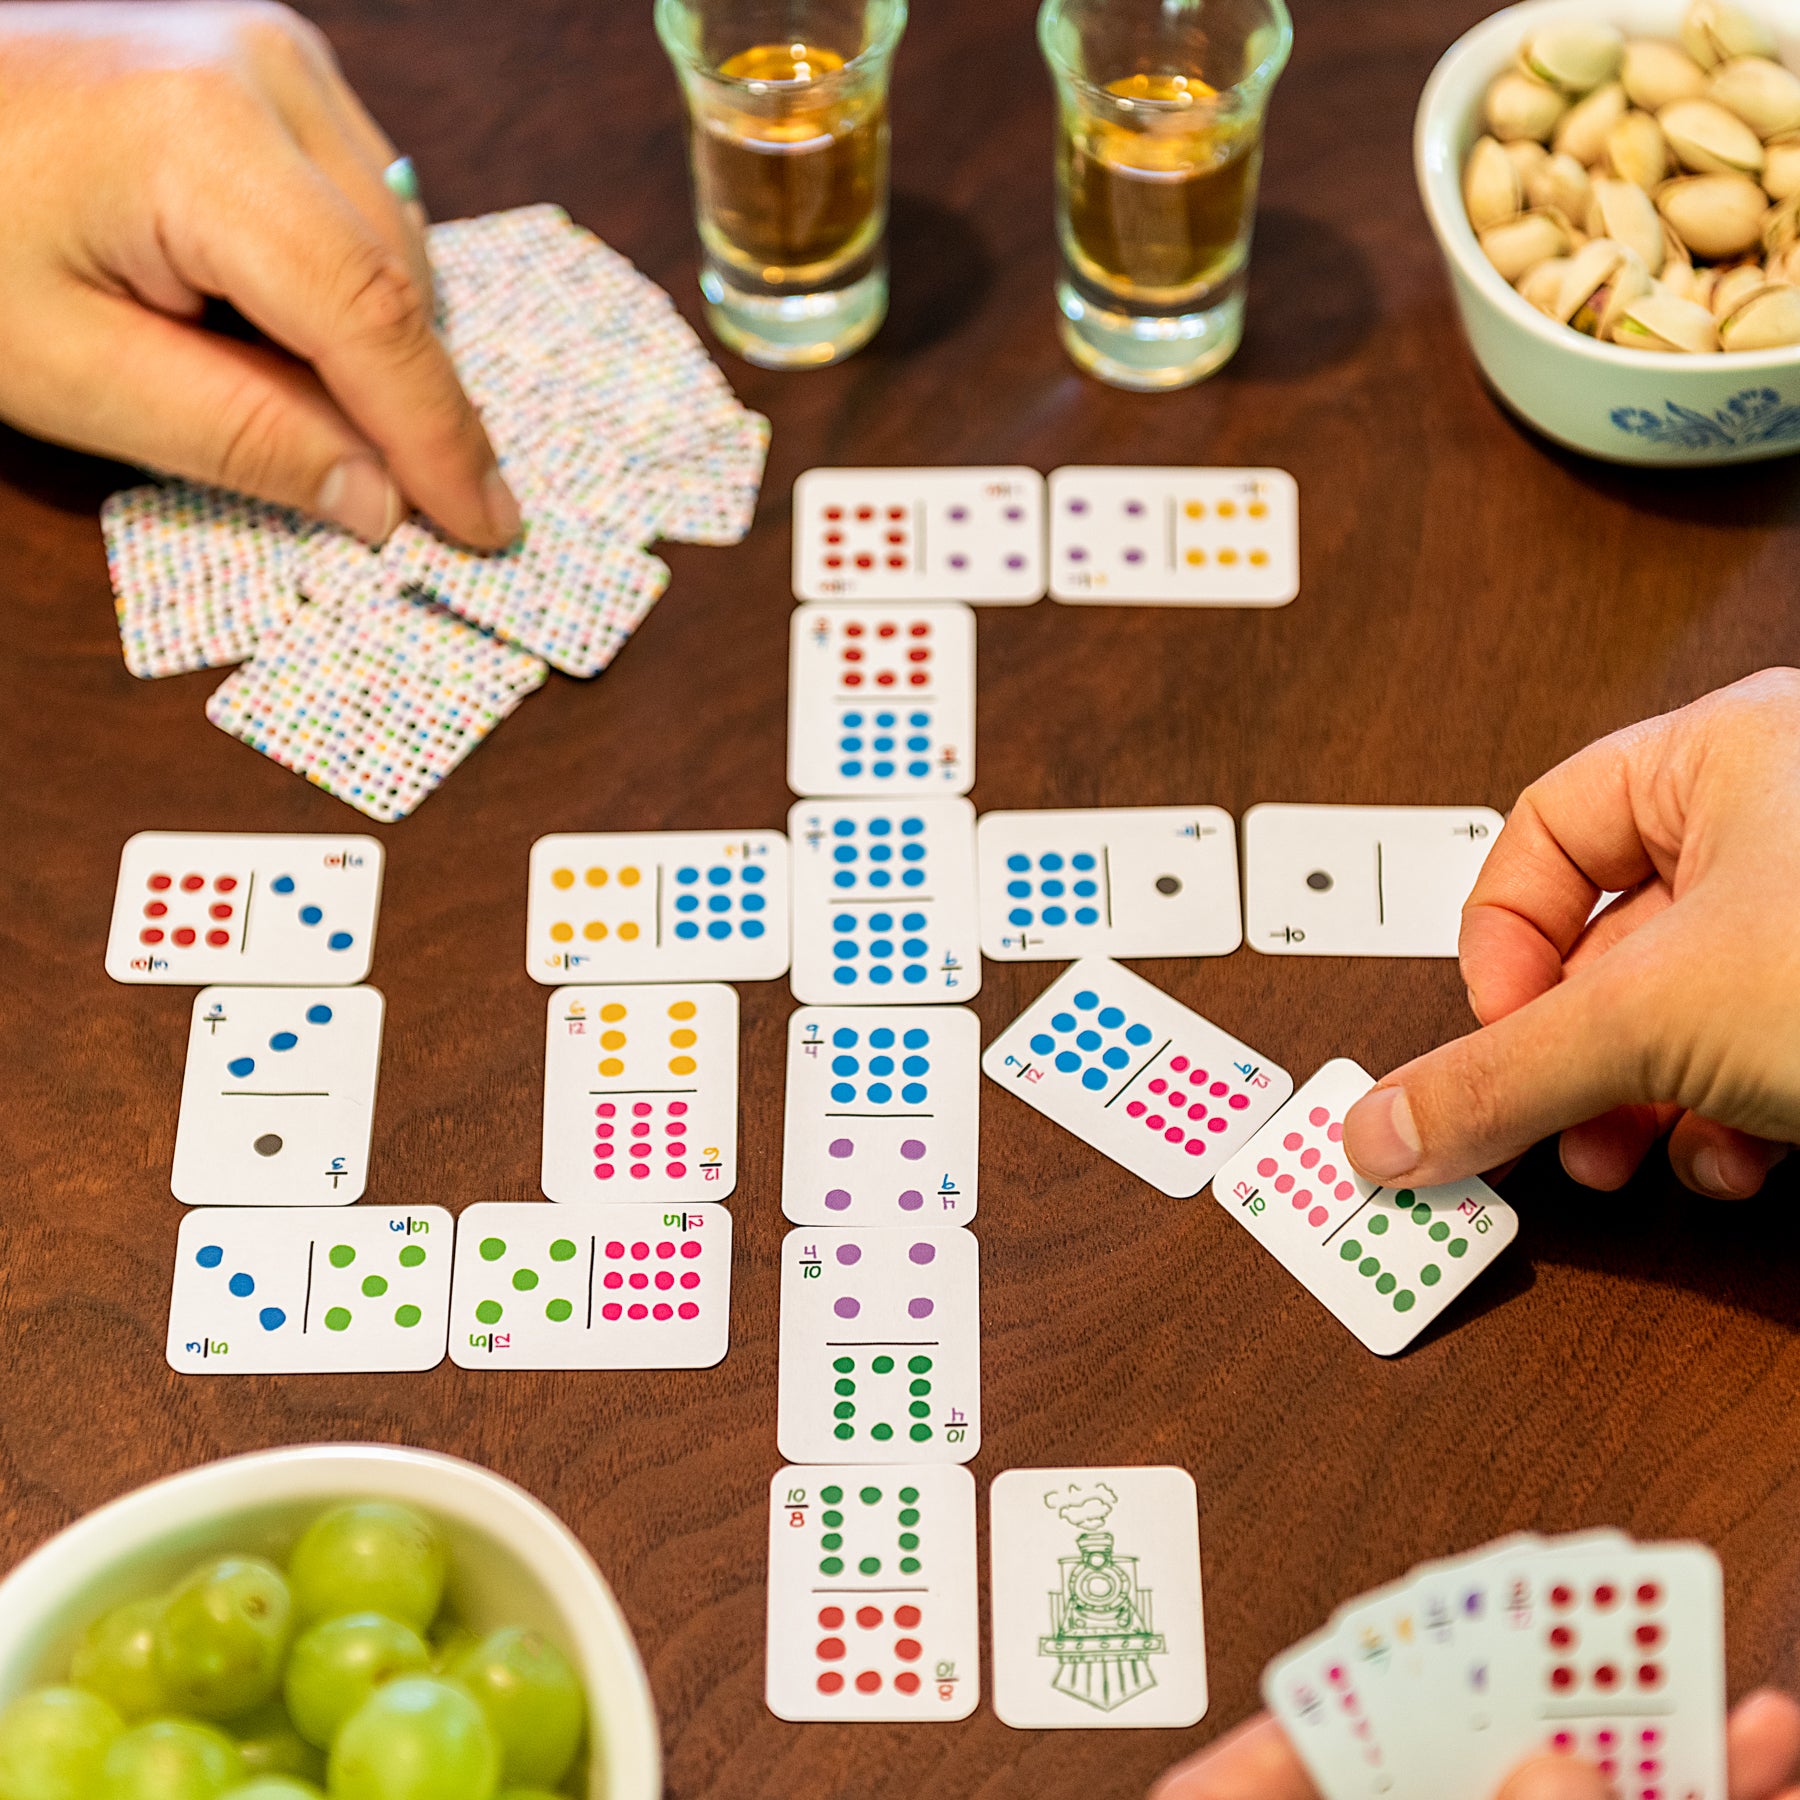 Two people playing Mexican Train dominoes with colorful small playing card dominoes instead of tiles. The game takes up less space on the table for a travel size. Strewn on the table are snacks and drinks from a game night.